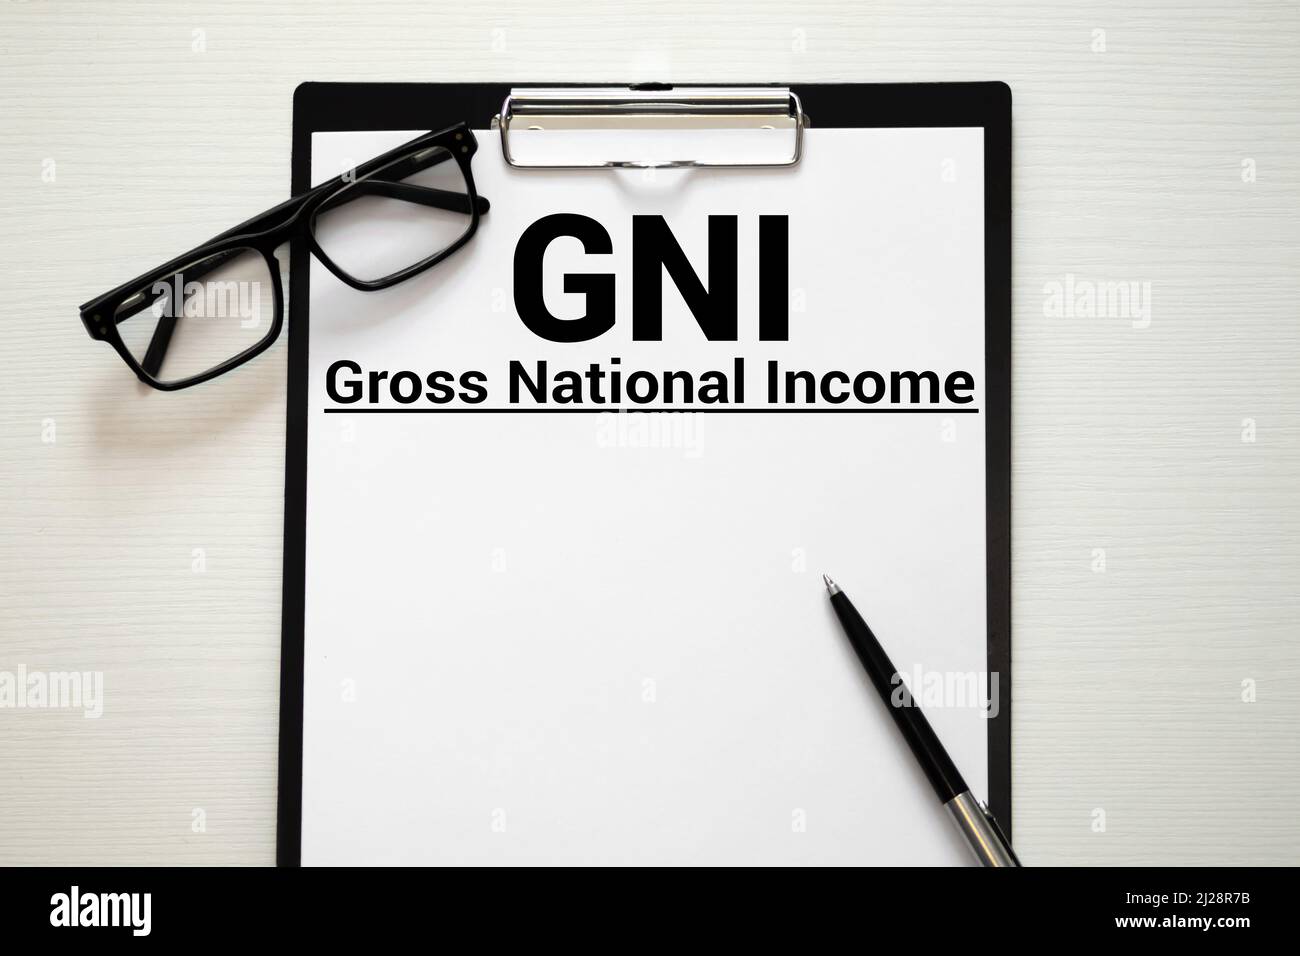 GNI Gross National Income written in a notebook on white table. Stock Photo